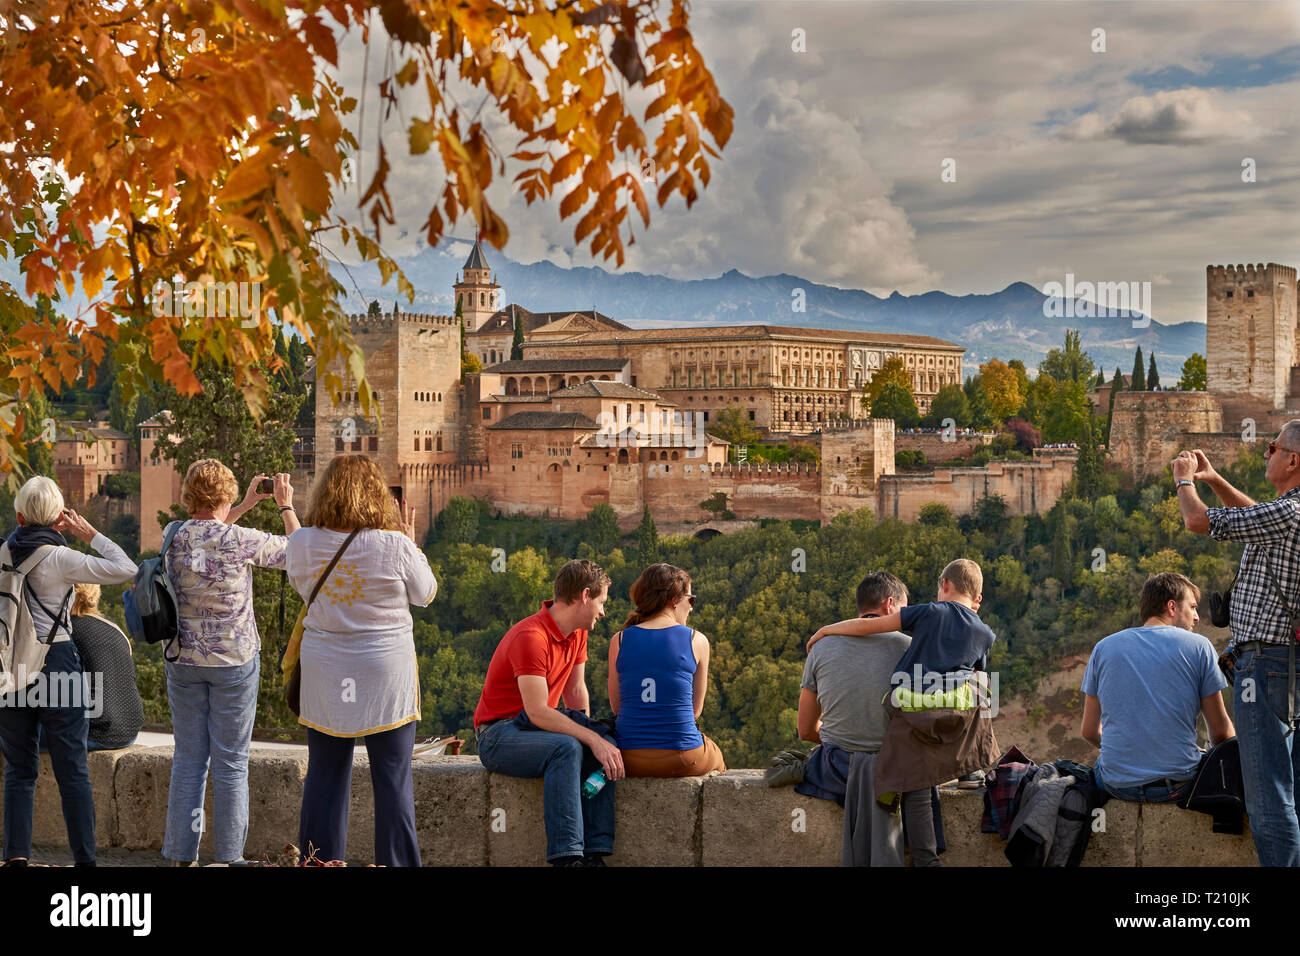 SPAIN ANDALUSIA GRANADA THE ALHAMBRA PEOPLE ENJOYING THE VIEW OF THE SPECTACULAR FORTIFIED CASTLE AND SIERRA NEVADA MOUNTAINS Stock Photo